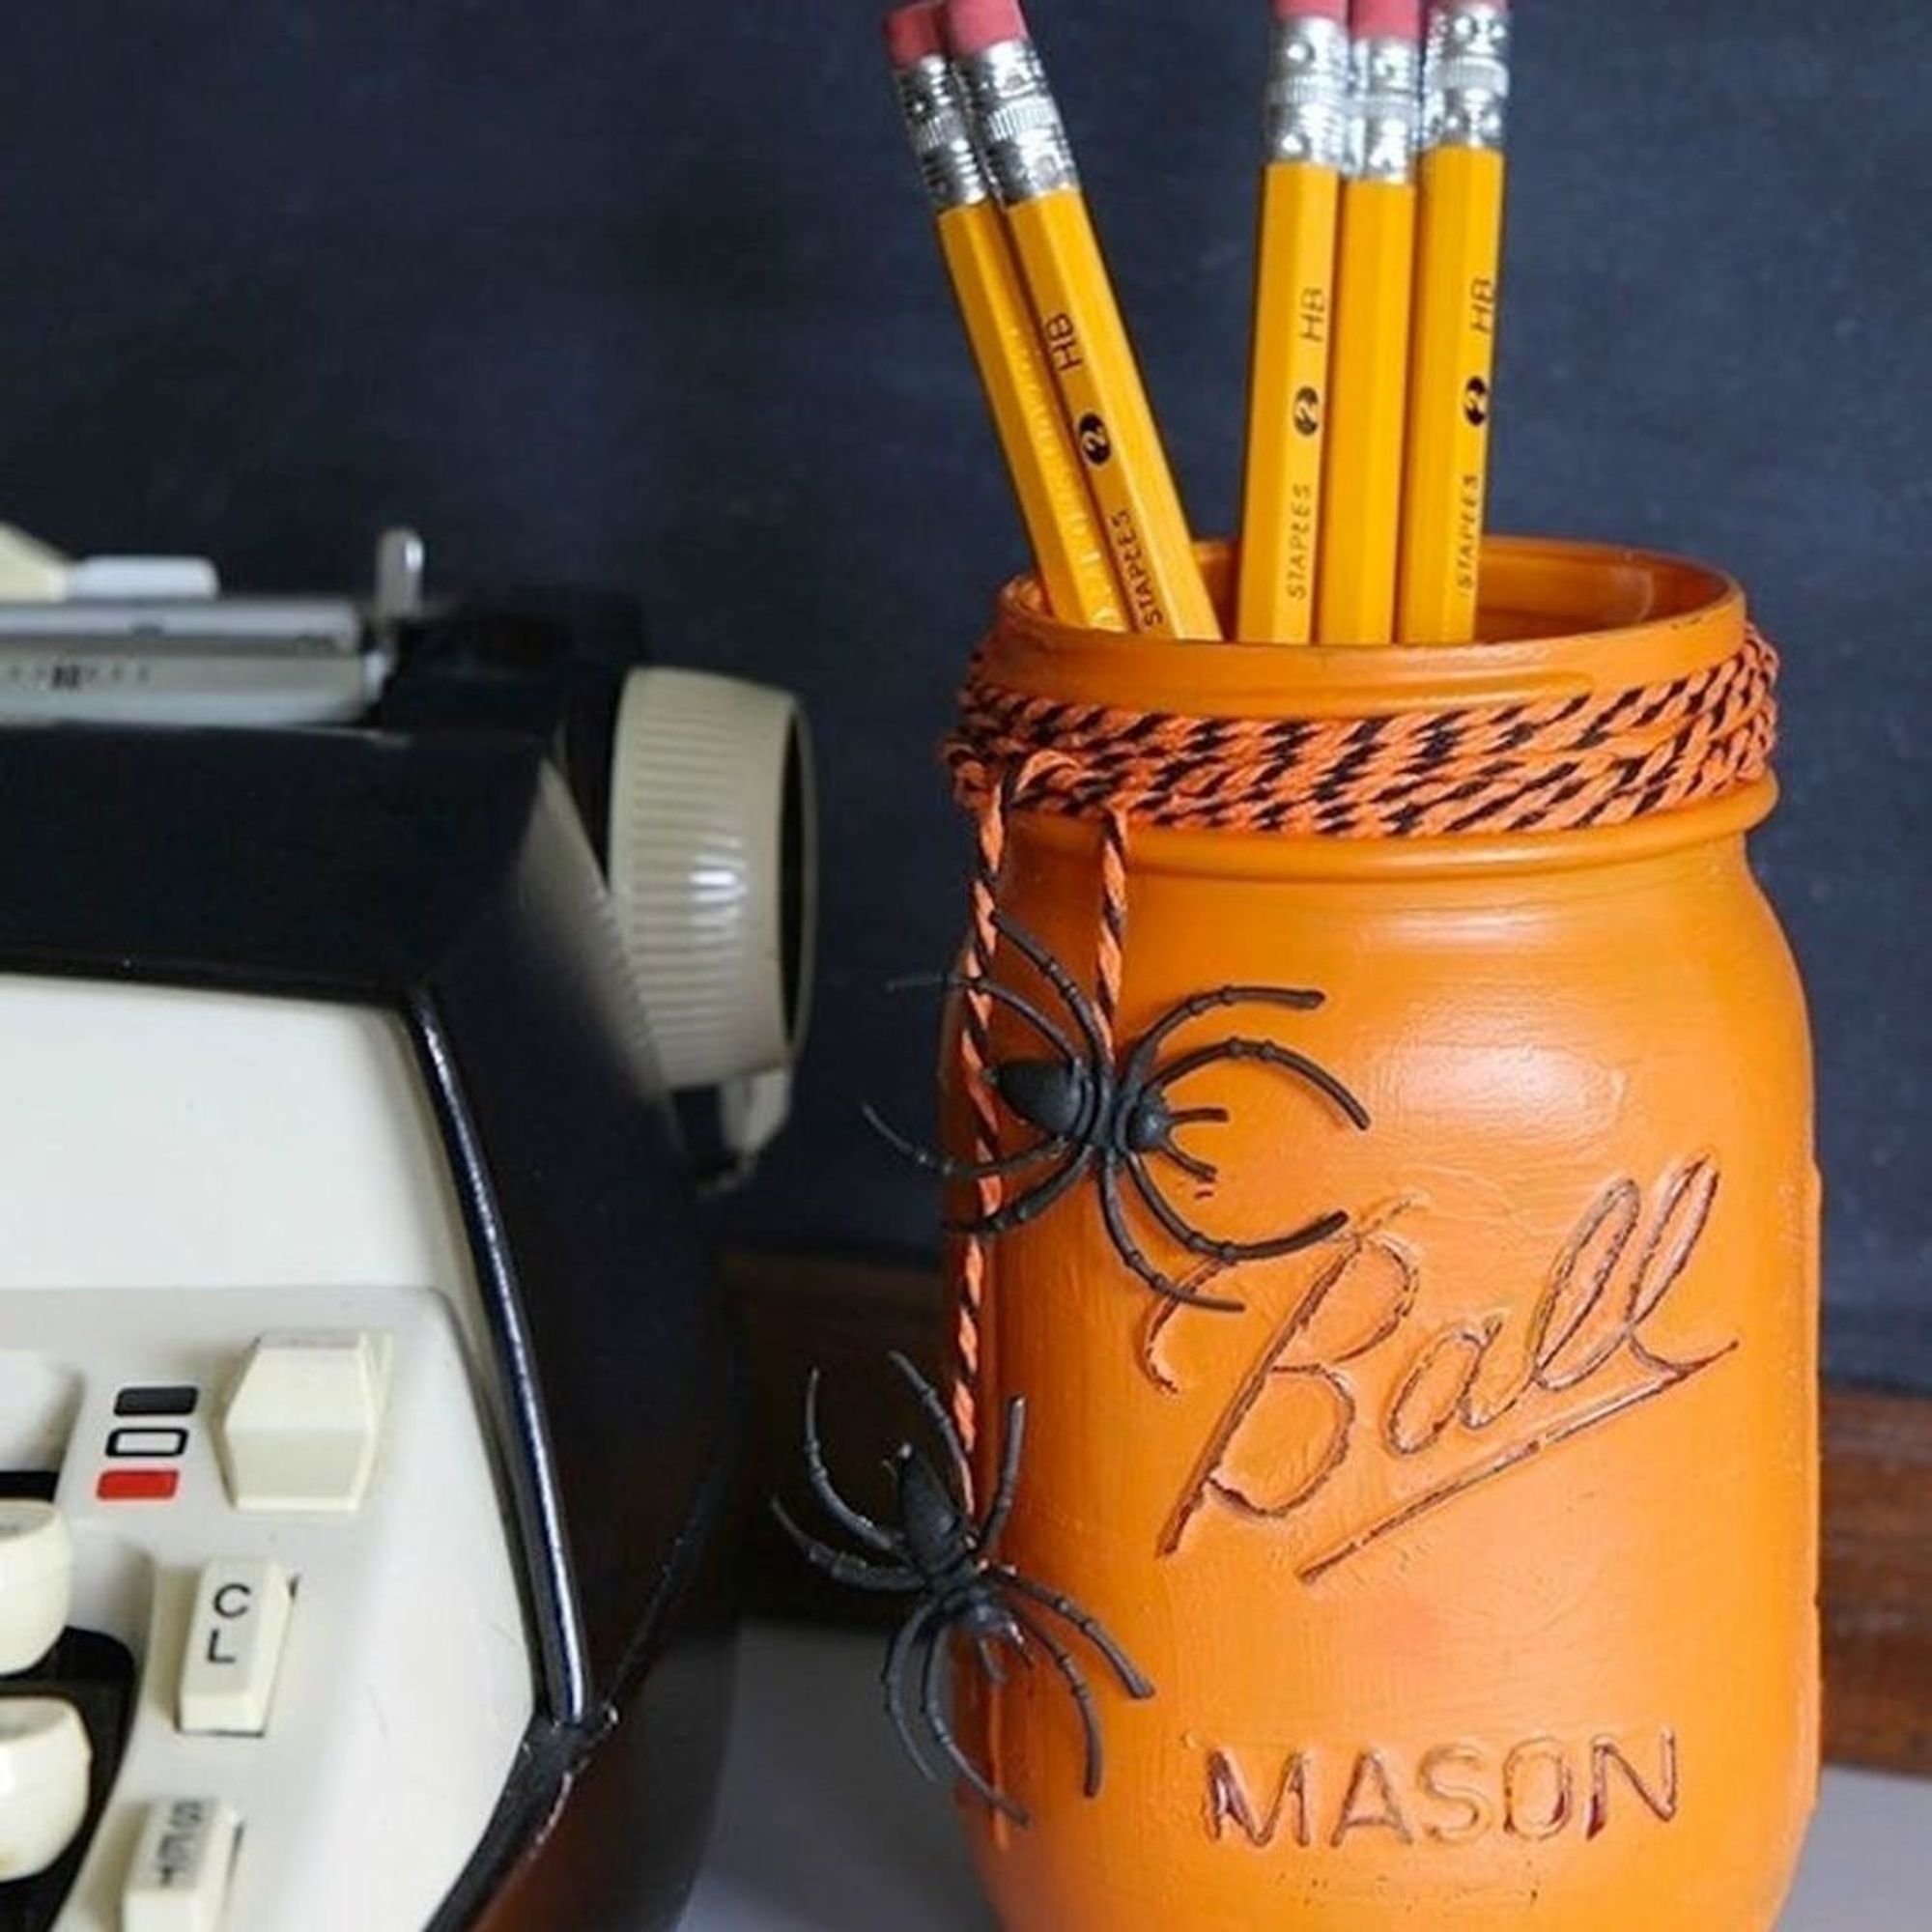 17 Halloween Decor Ideas for a Spooky Office or Cubicle - Brit + Co